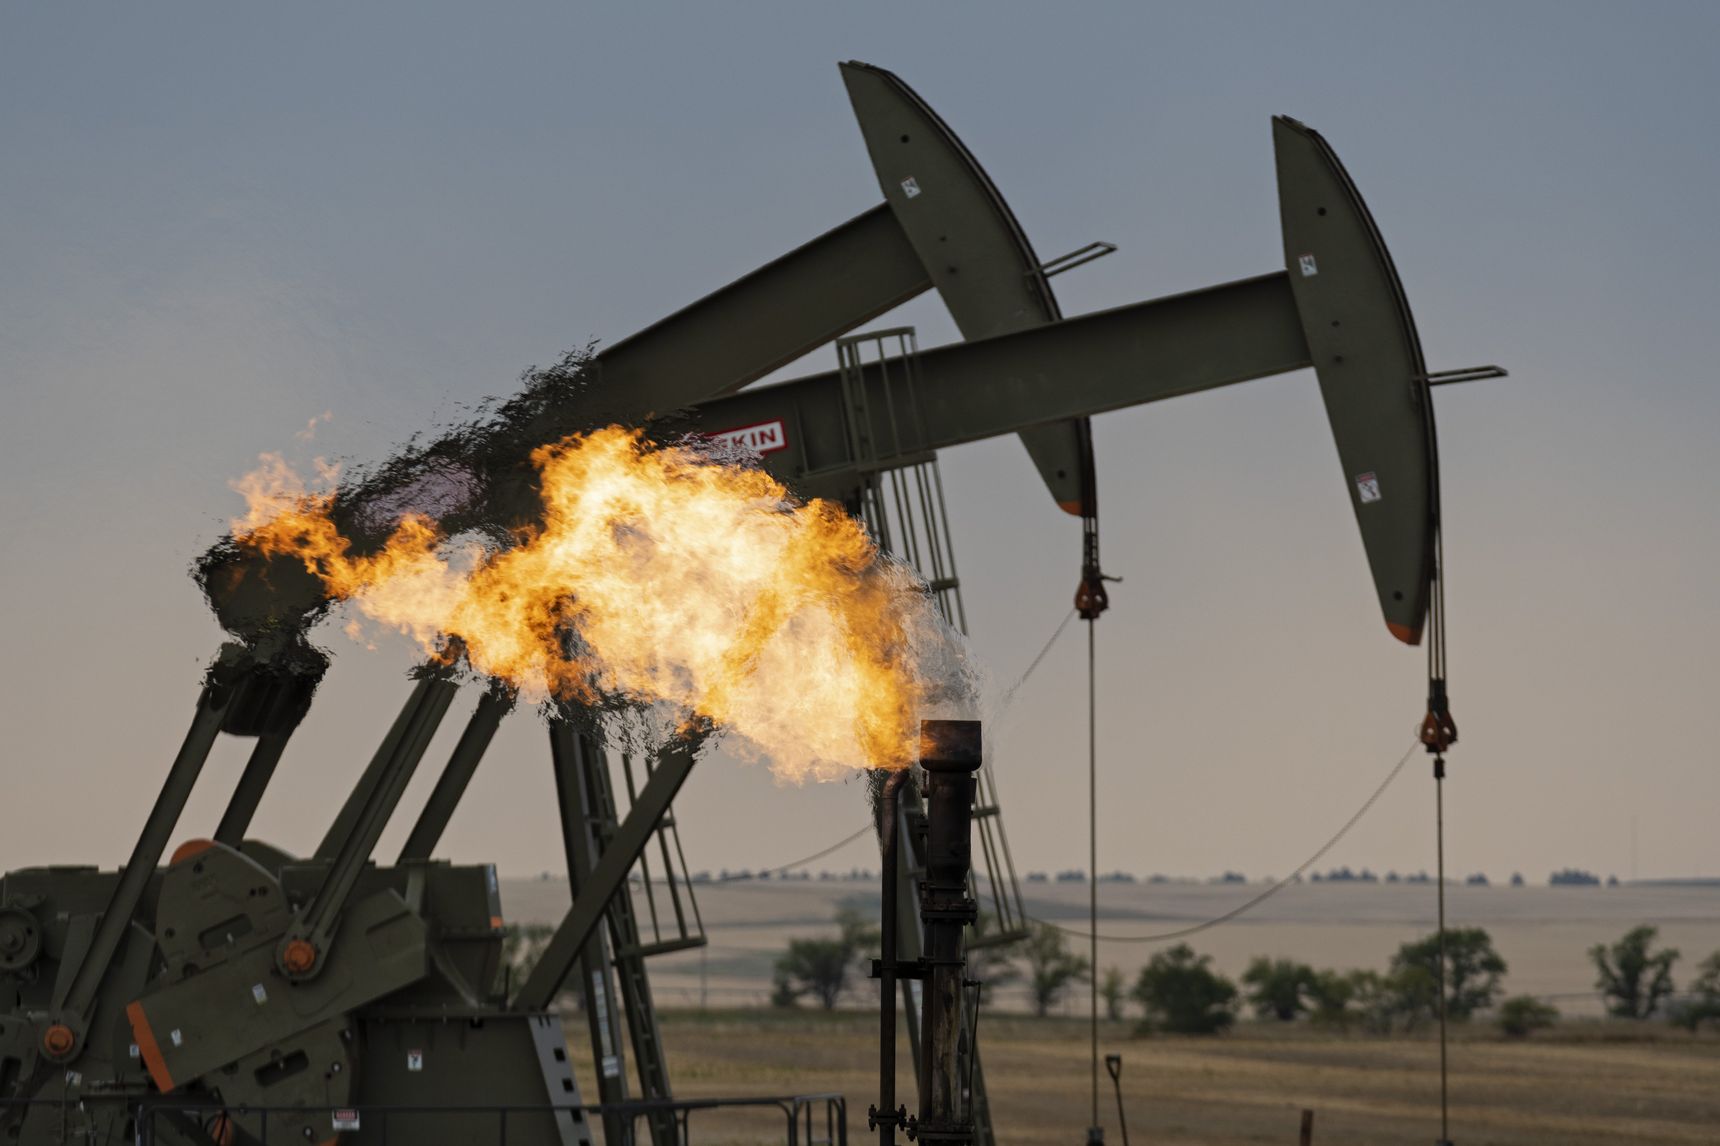 Methane Emissions From Oil and Gas Wells Are Much Higher Than Thought, Study Shows